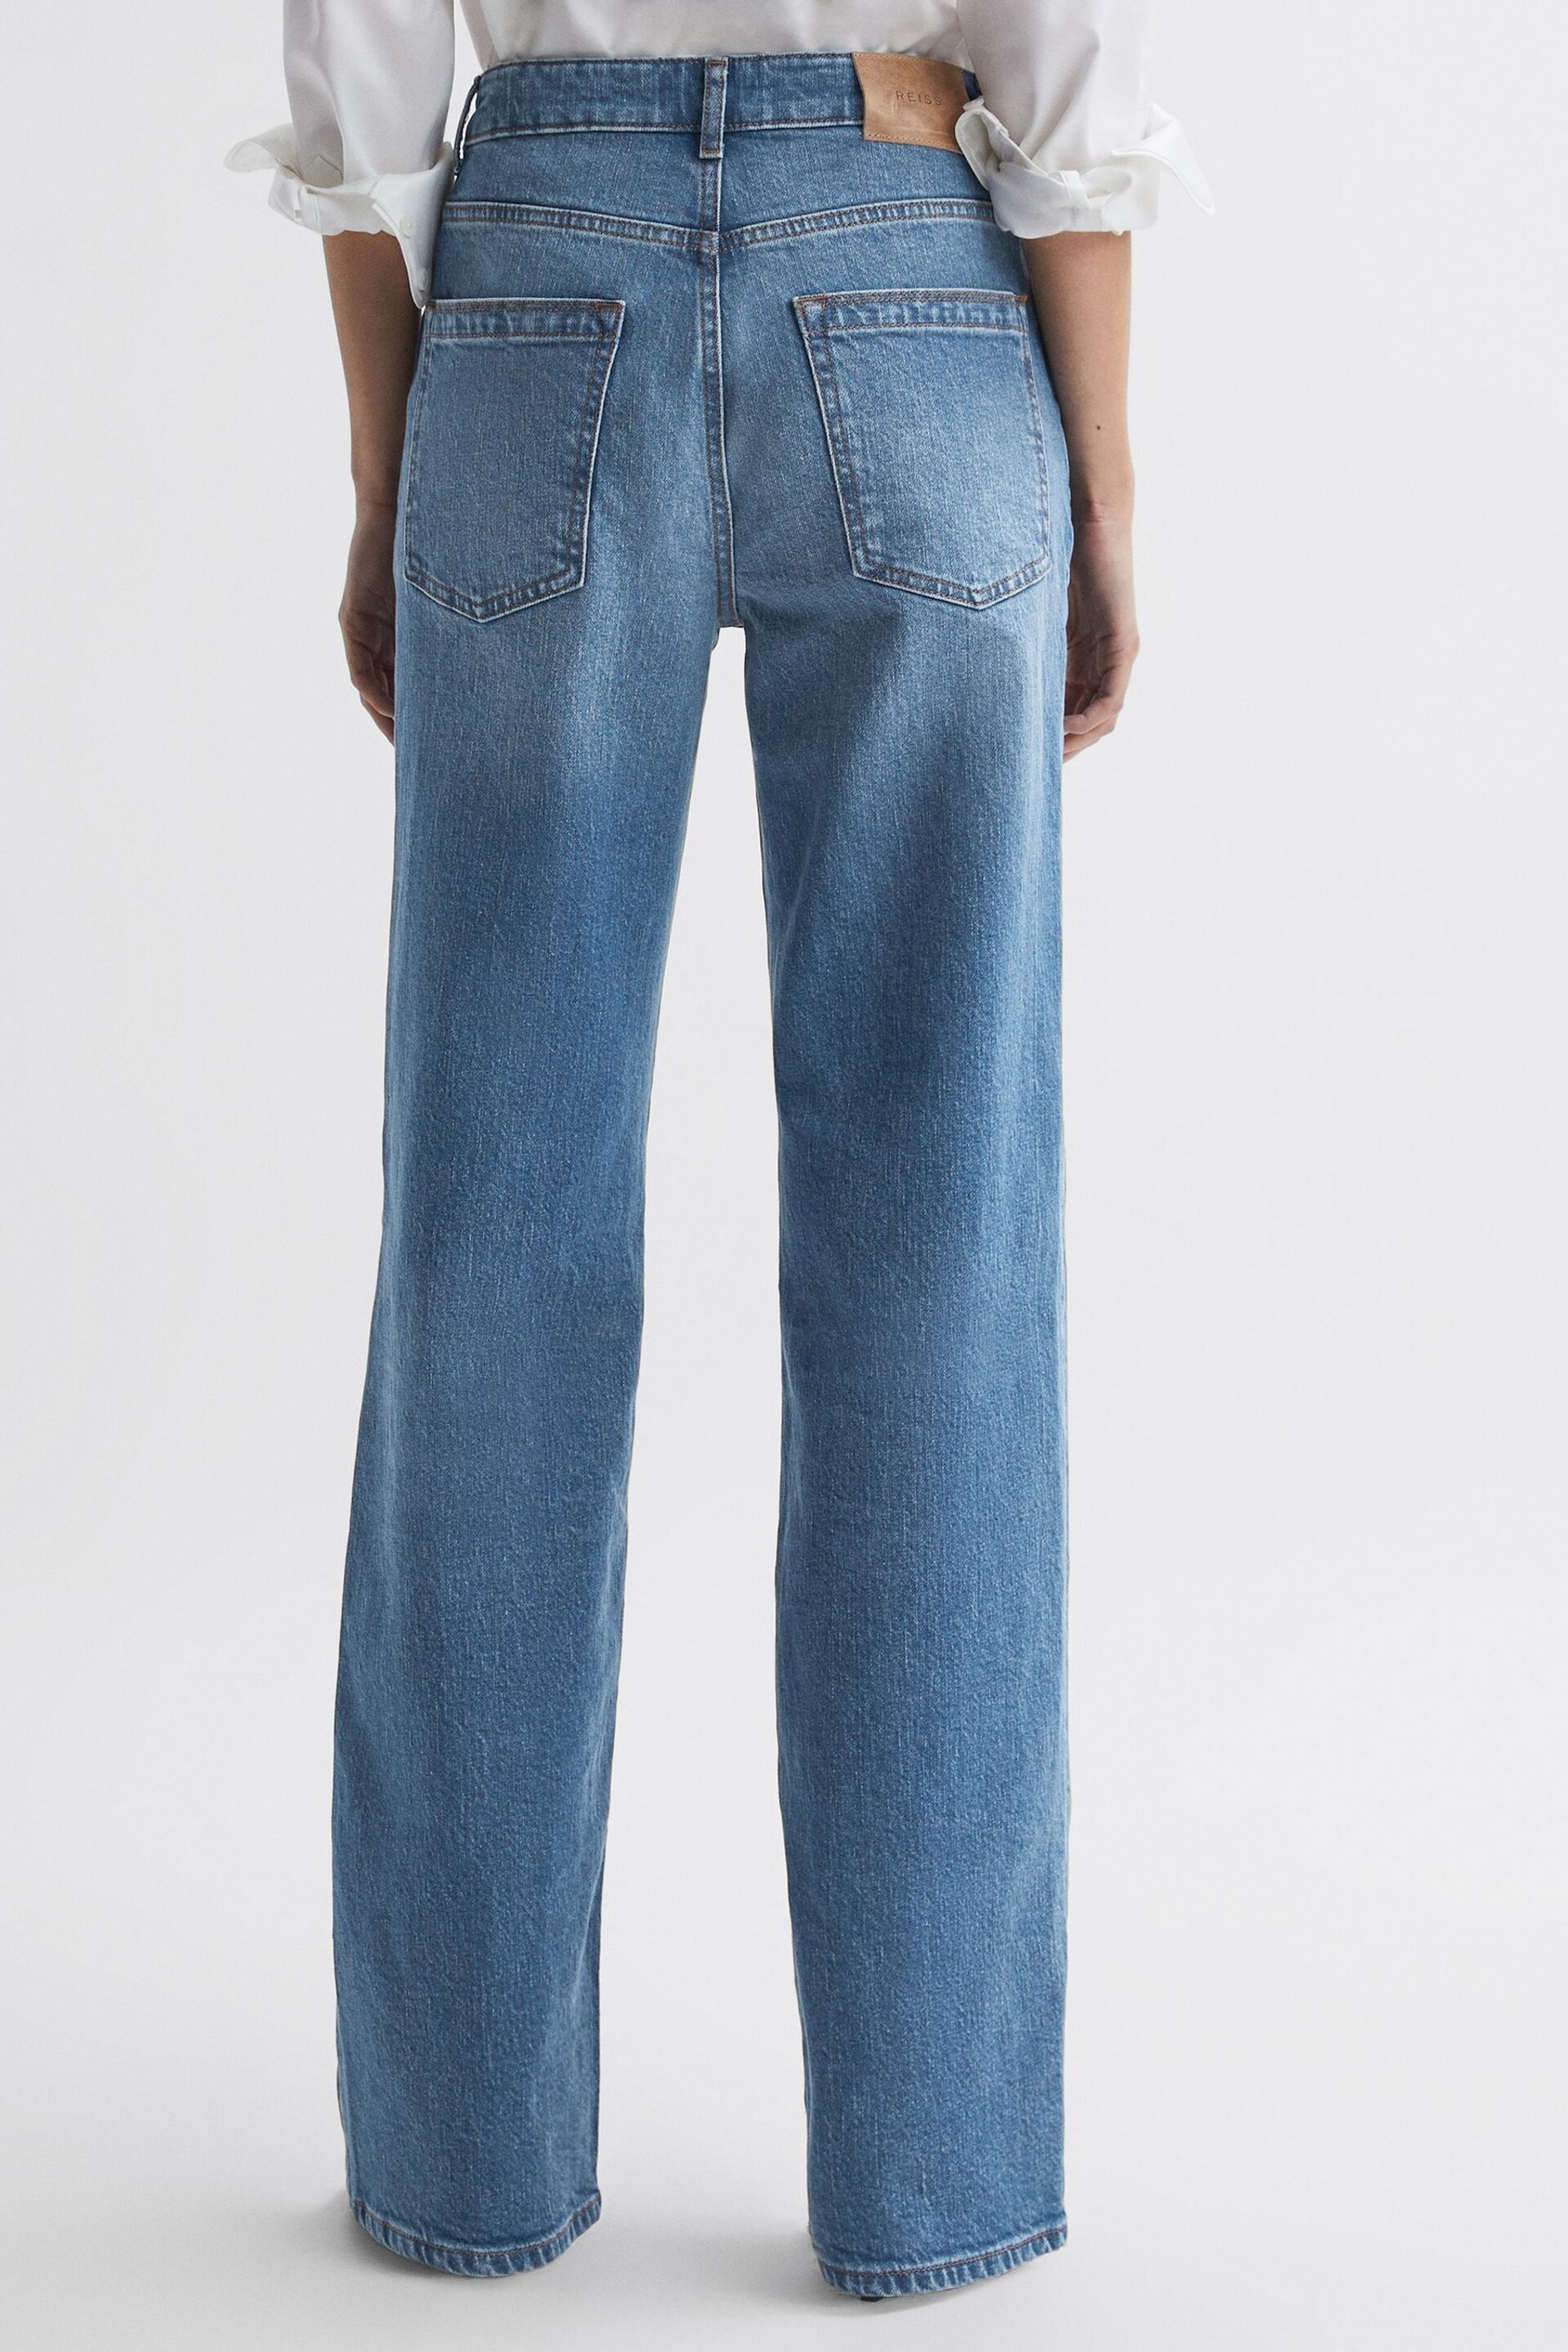 Reiss Mid Blue Marion Mid Rise Wide Leg Jeans - Image 4 of 4